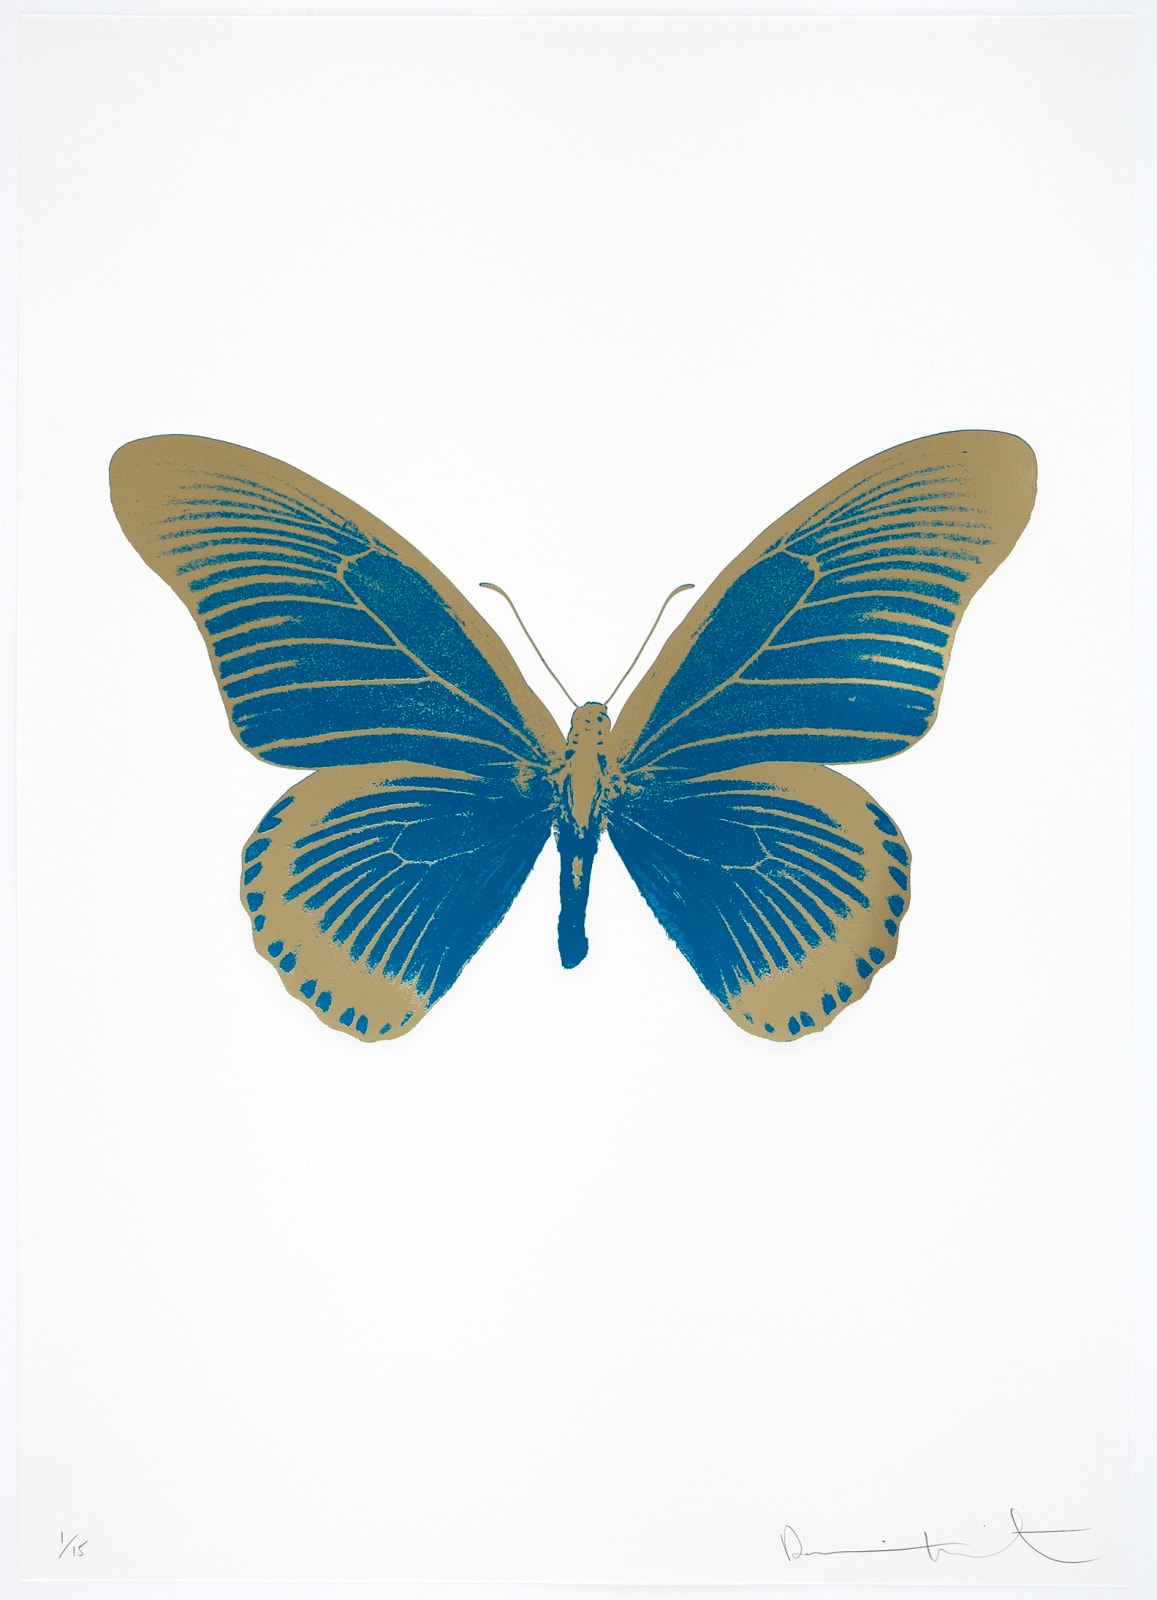 Damien Hirst The Souls Iv Turquoise Cool Gold Damien Hirst Butterfly Foil Print For Sale Damien Hirst Print For Sale 2010 Paul Stolper